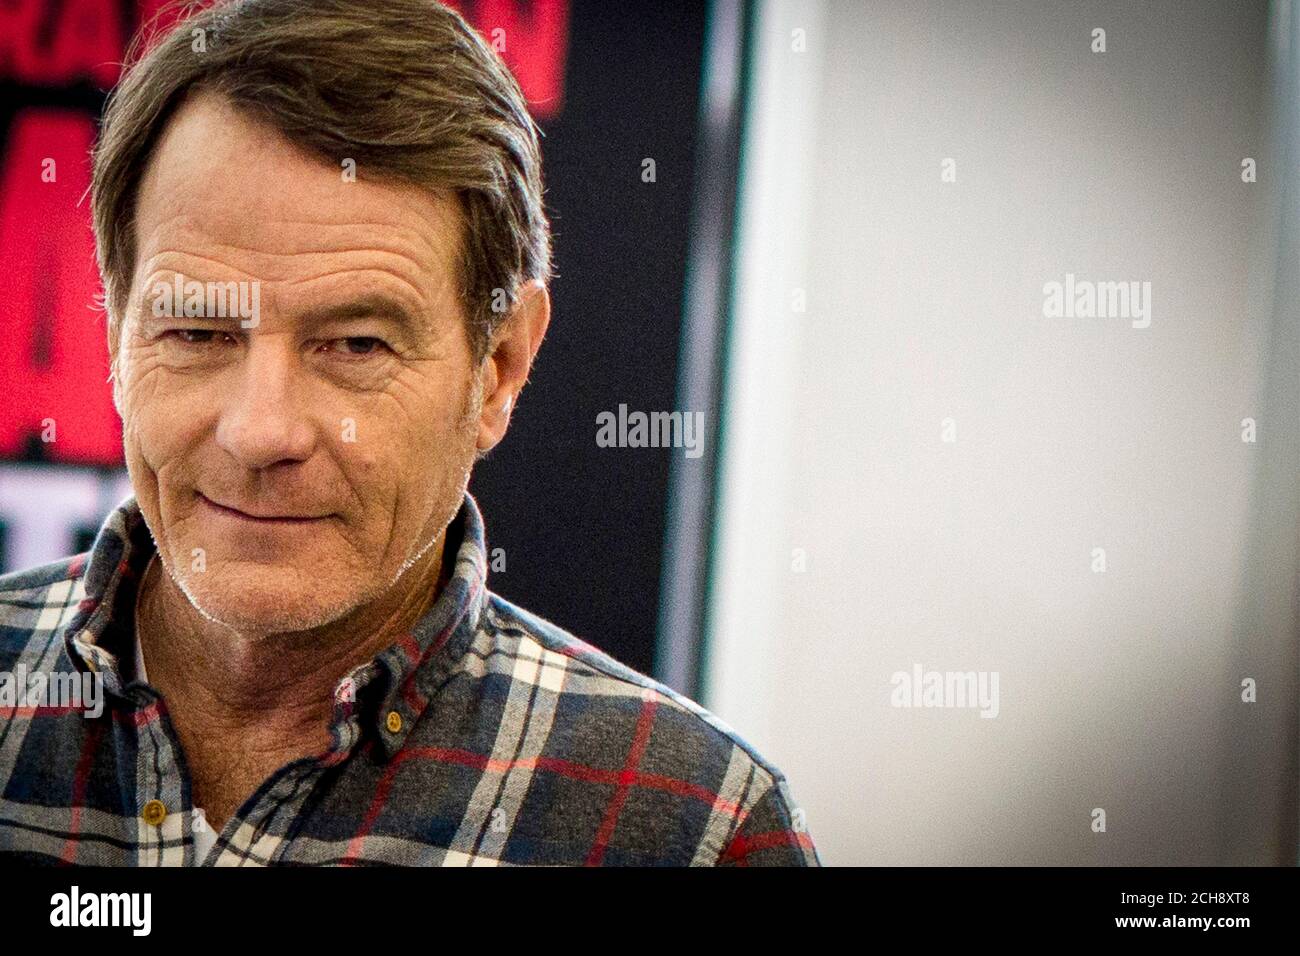 Actor Bryan Cranston poses during a photocall for his new Broadway play  'All the Way' at a Manhattan studio in New York January 22, 2014. After five acclaimed seasons and multiple Emmys for playing a meth-making chemistry teacher on television's 'Breaking Bad,' Cranston is stepping into the shoes of President Lyndon B. Johnson for his Broadway debut in 'All the Way.' The play, which begins previews on February 10 and opens at The Neil Simon Theatre on March 6, chronicles the first year of Johnson's presidency after he was catapulted into the White House following the assassination of John F.  Stock Photo